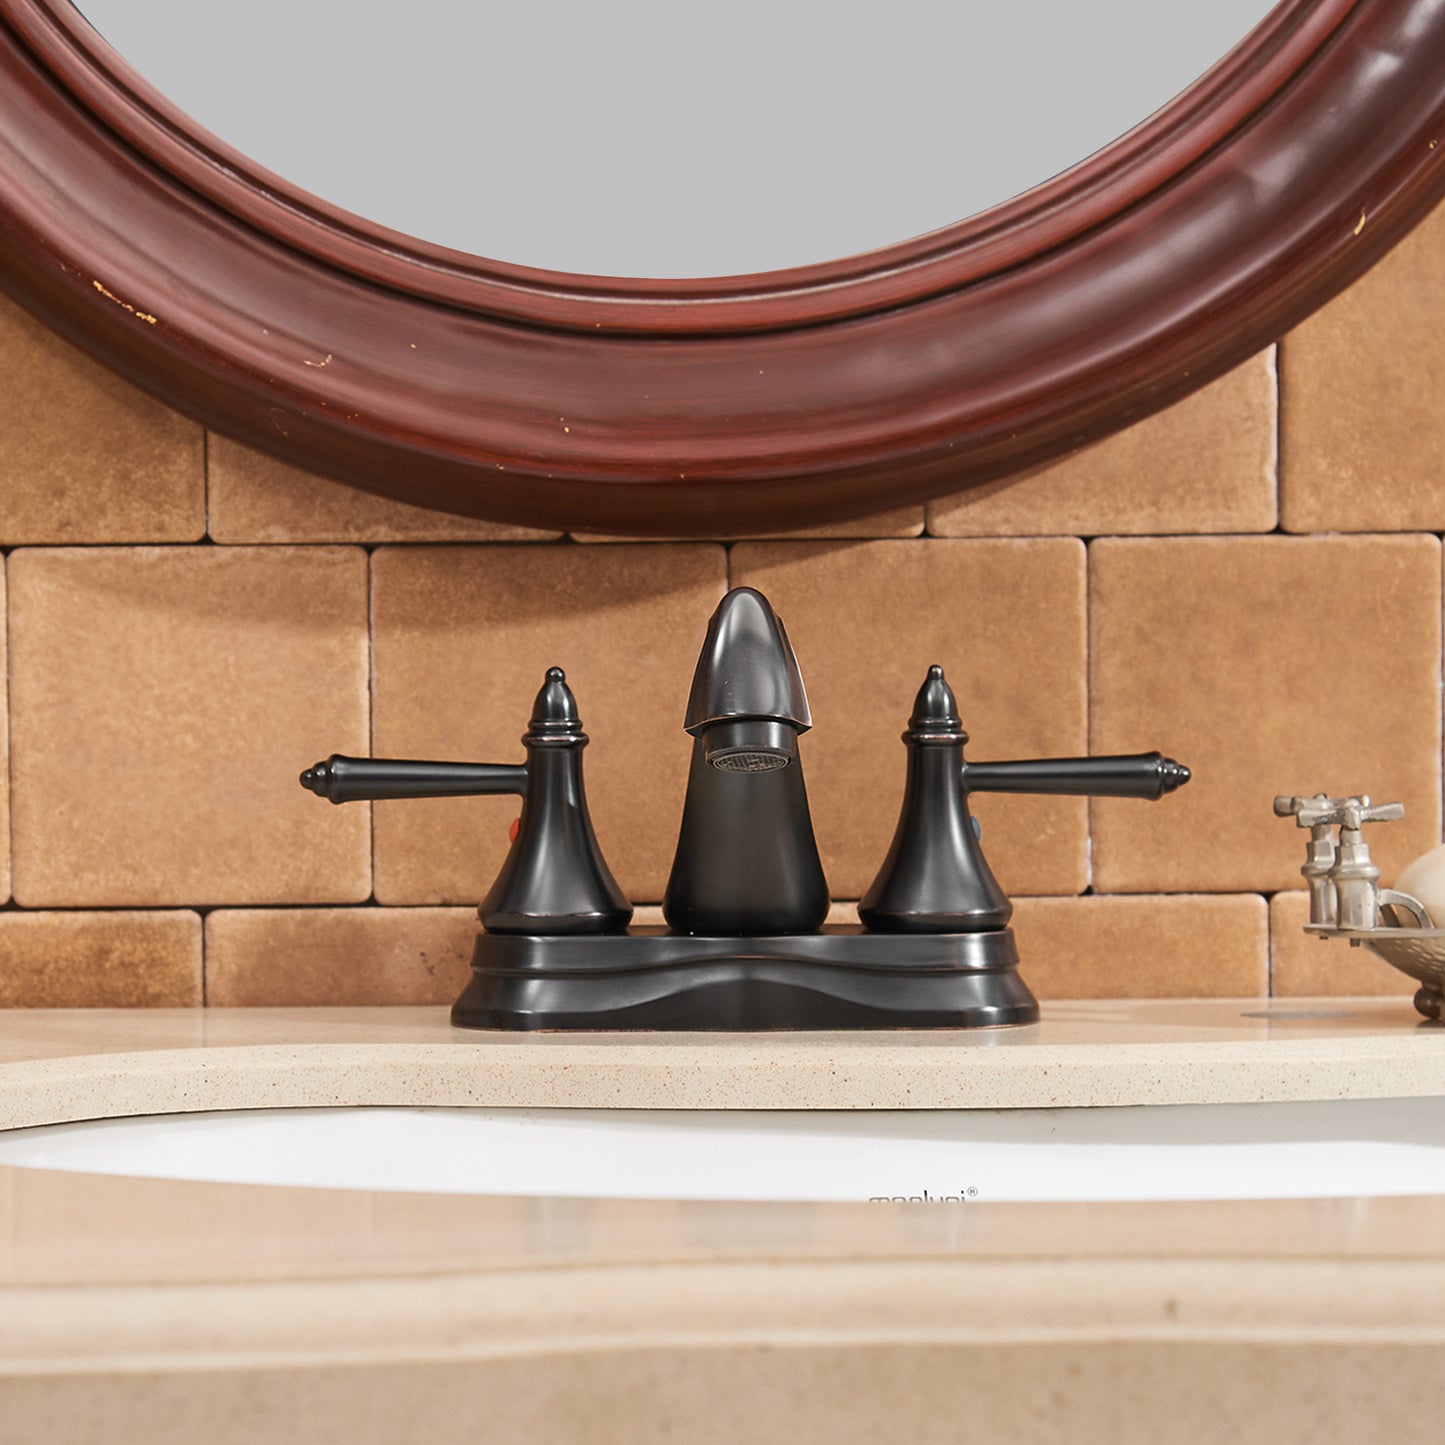 Oil Rubbed Bronze Double Handle Bathroom Faucet with Pop-up Drain Assembly for 4-inch Centerset Sink